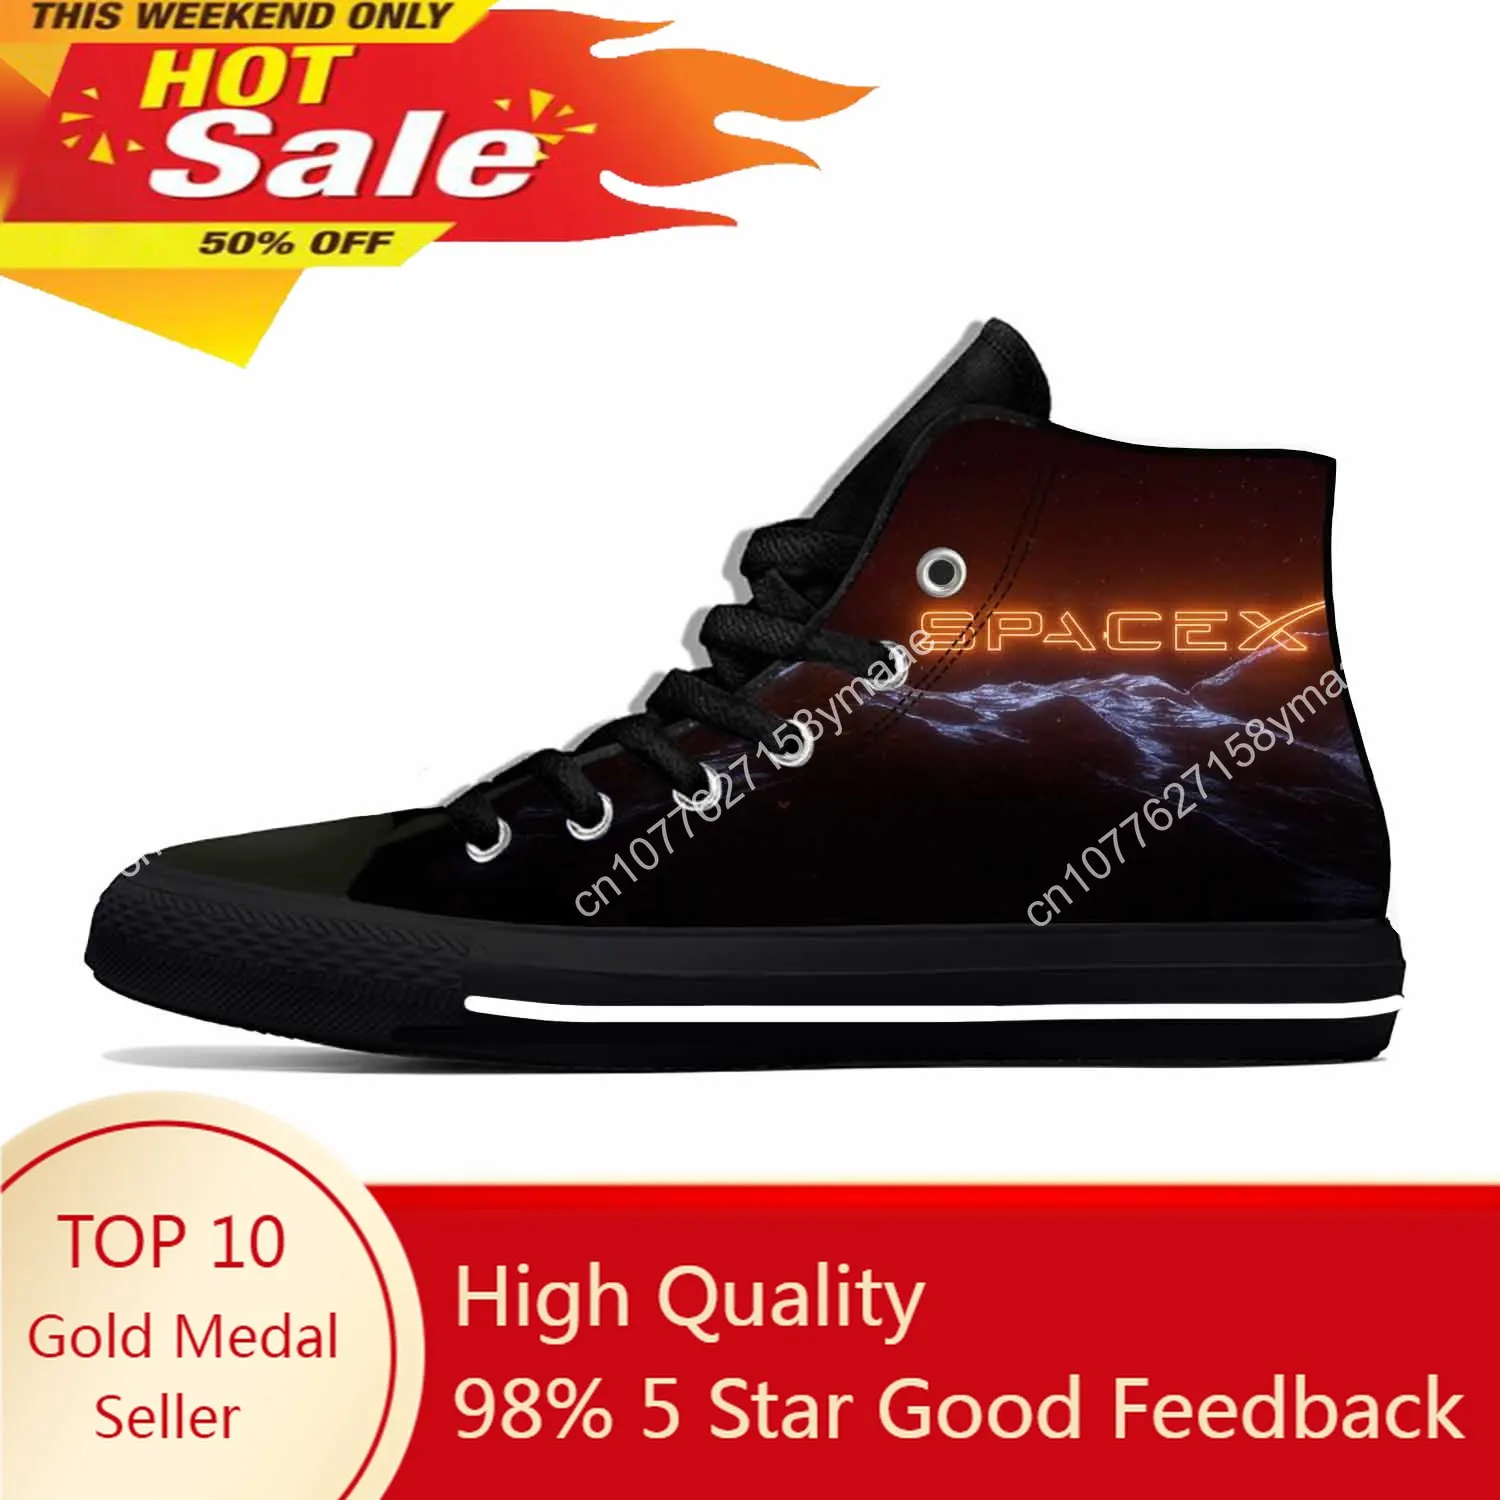 Anime Manga Cartoon SpaceX Space X Funny Fashion Casual Cloth Shoes High Top Lightweight Breathable 3D Print Men Women Sneakers funny cartoon anime print socks creative fashion personalized novelty men women comfort breathable pink yellow cotton sock